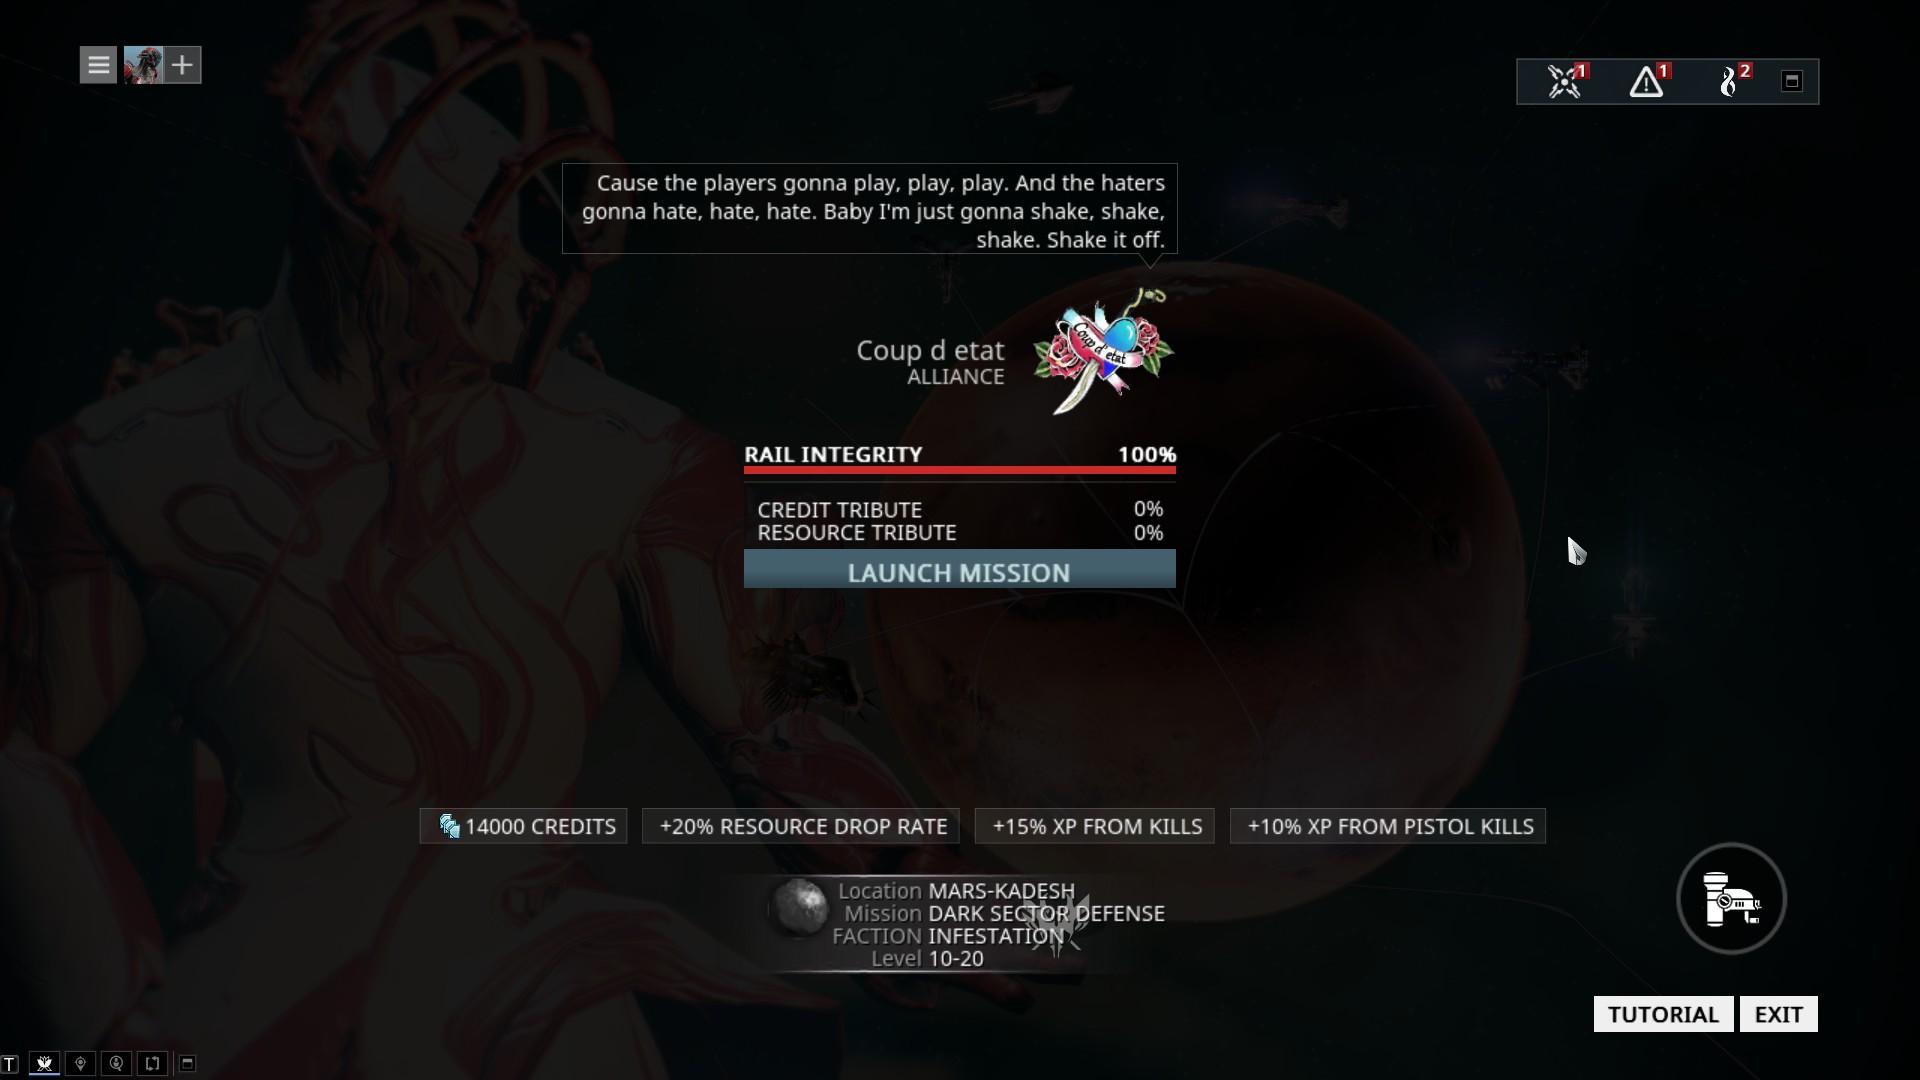 New to Warframe, why are Taylor Swift lyrics on my screen?